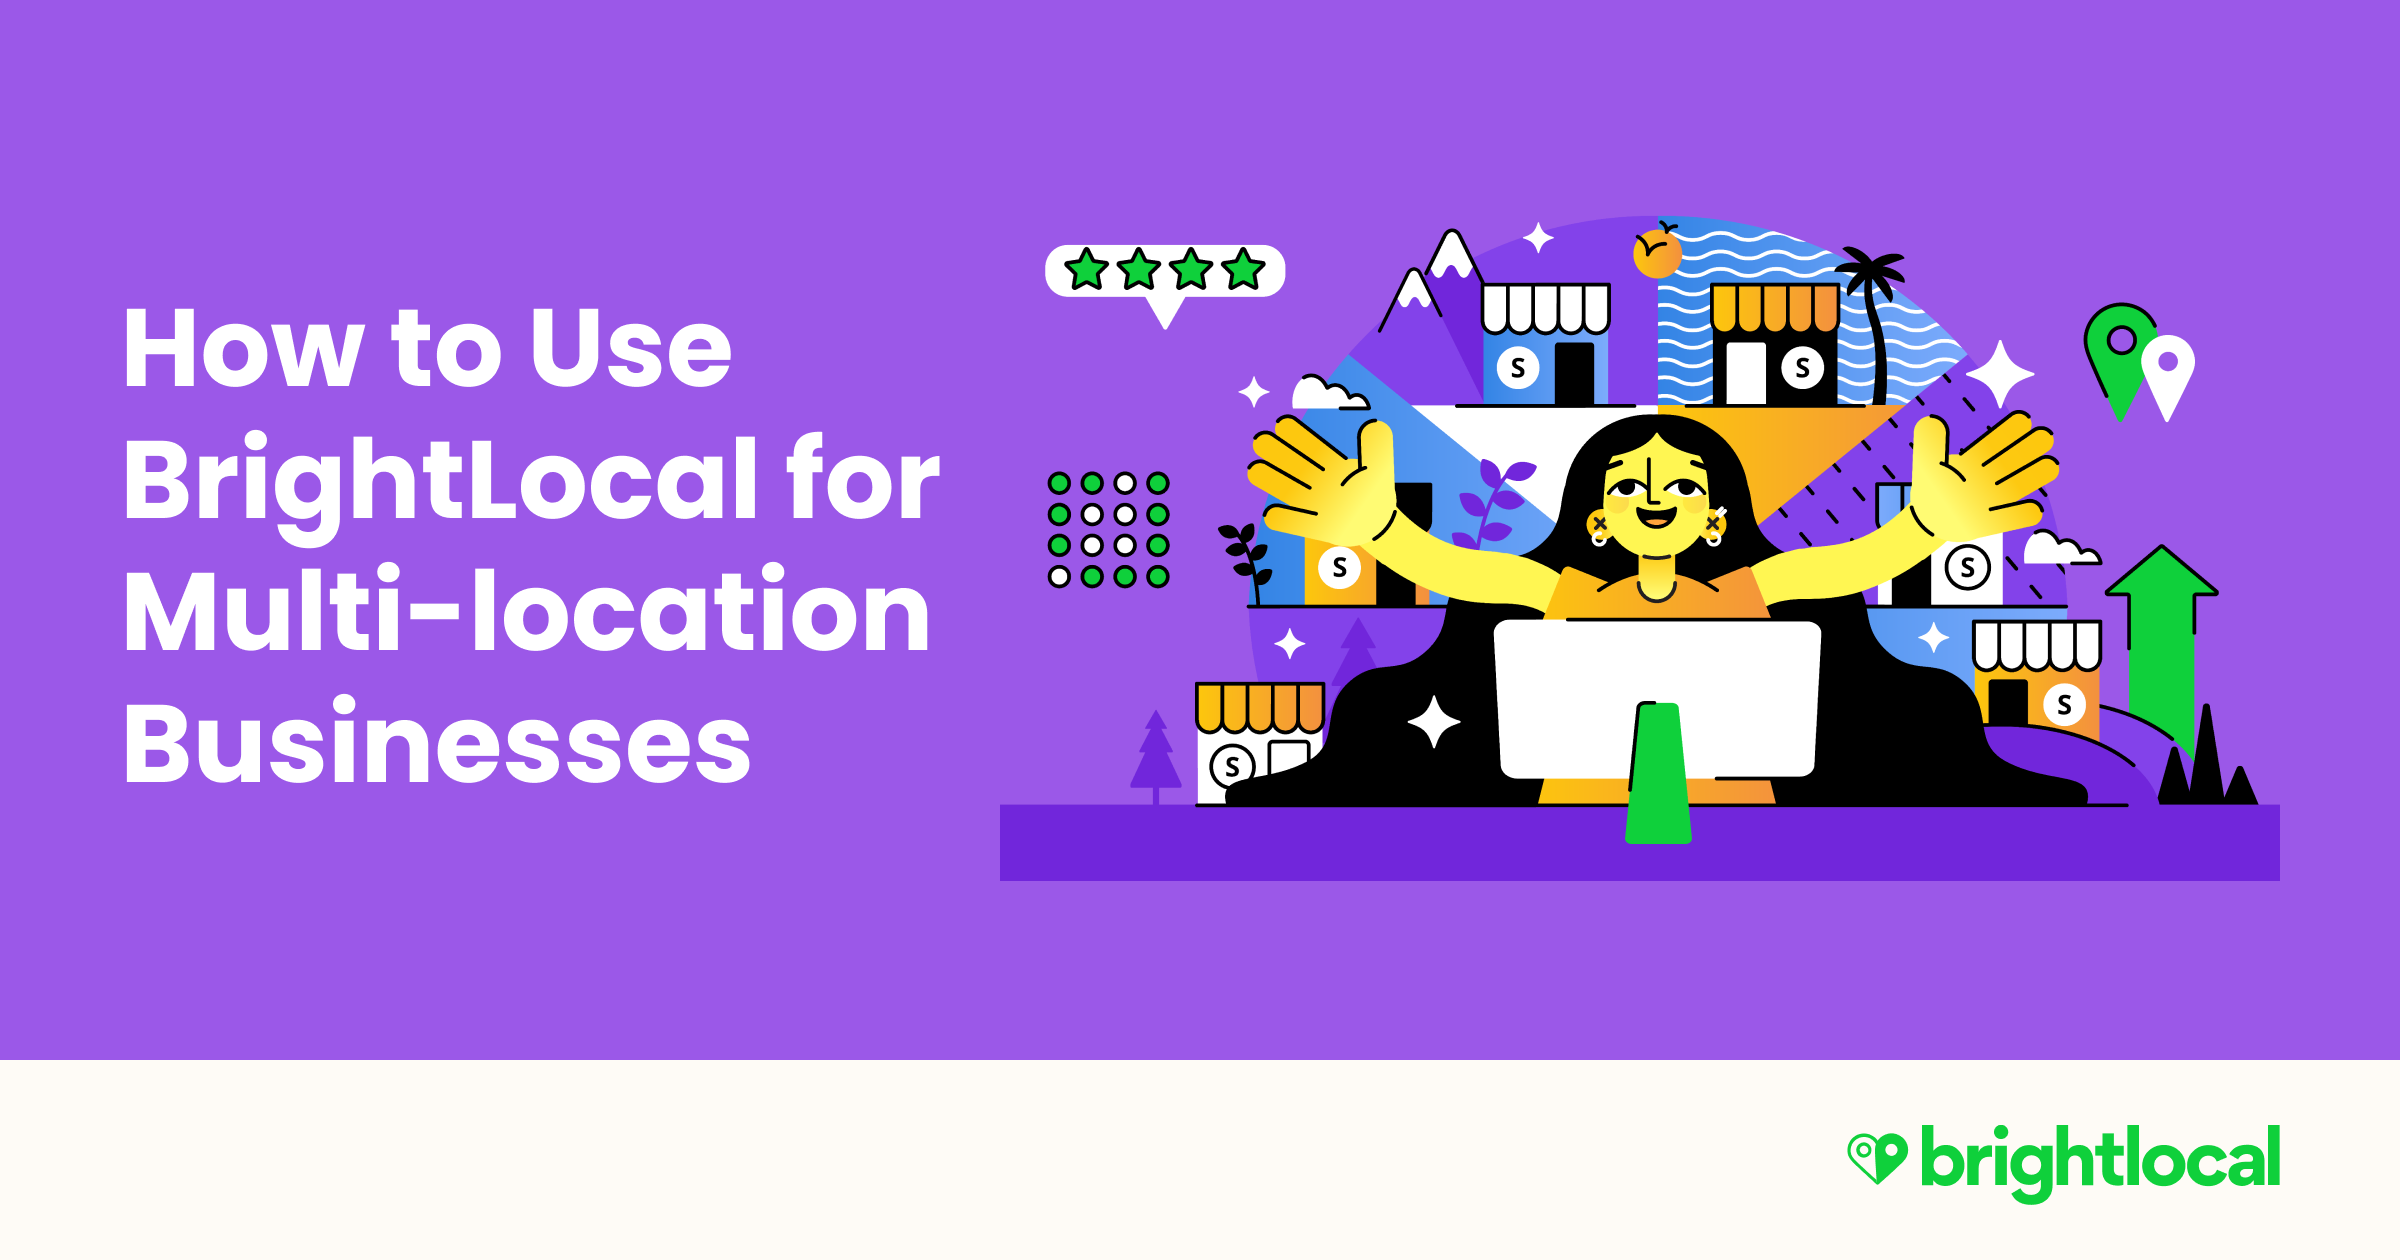 How to Use BrightLocal for Multi-location Businesses